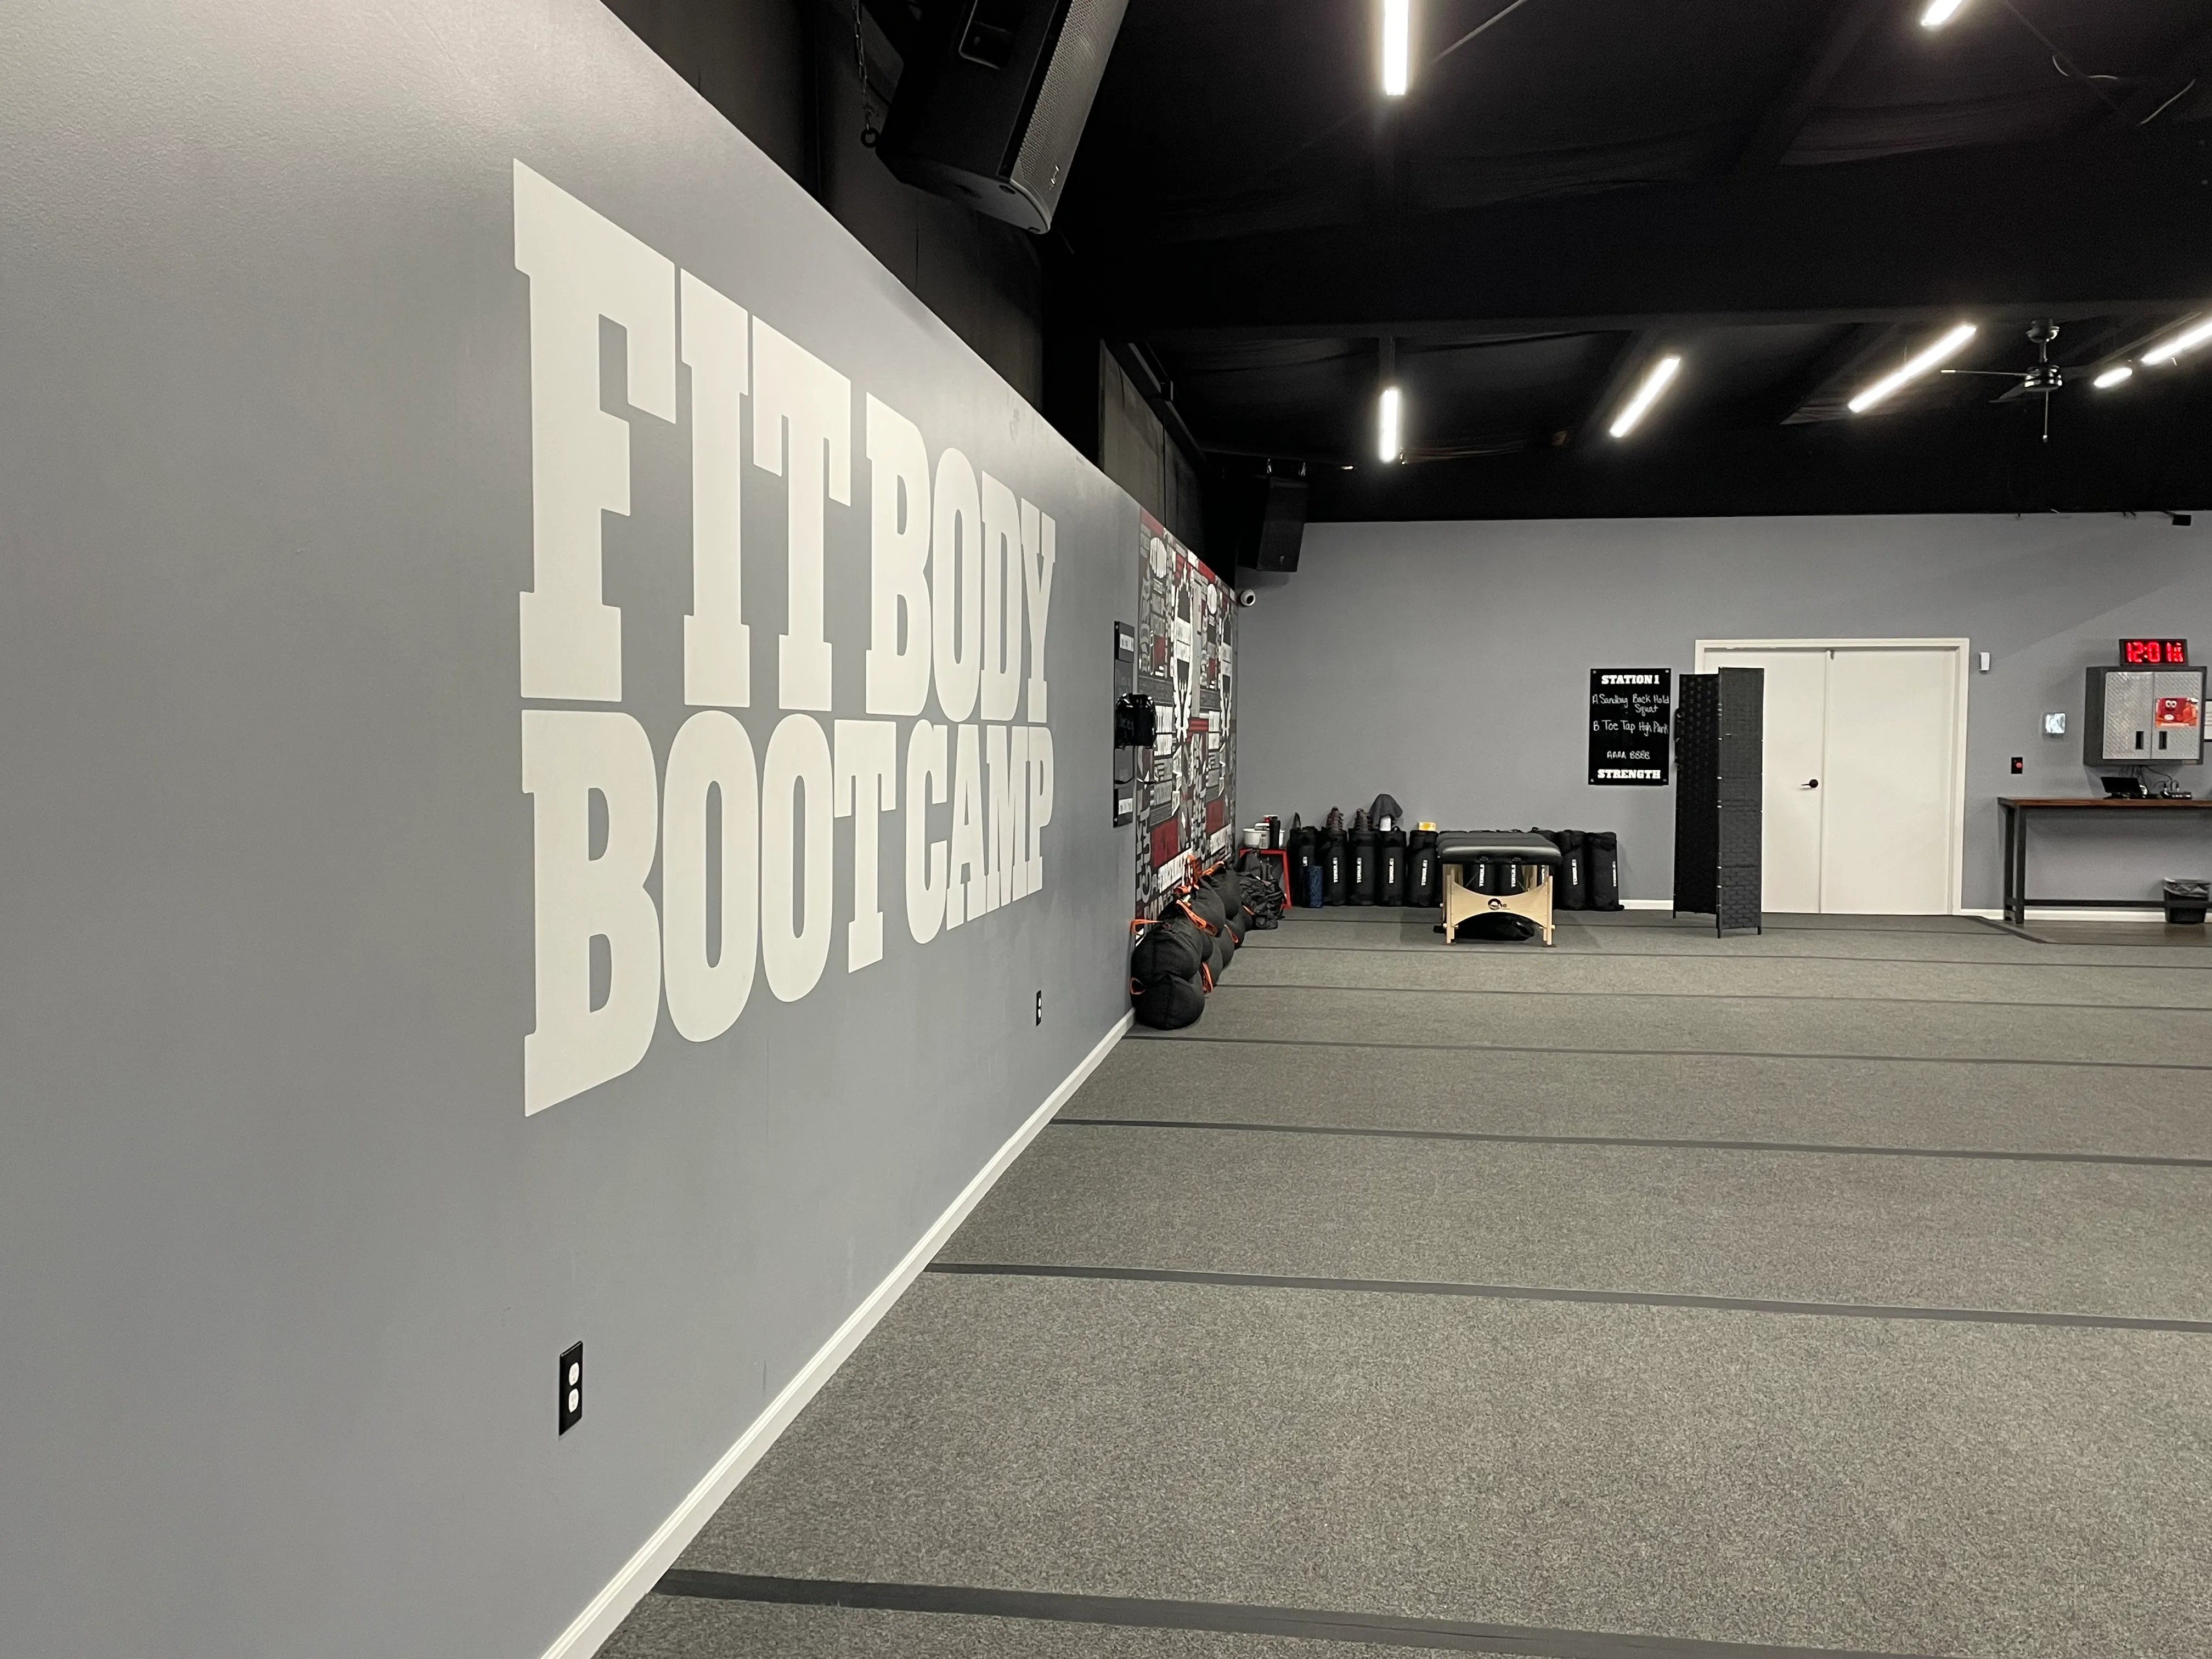 Fit-body-boot-camp